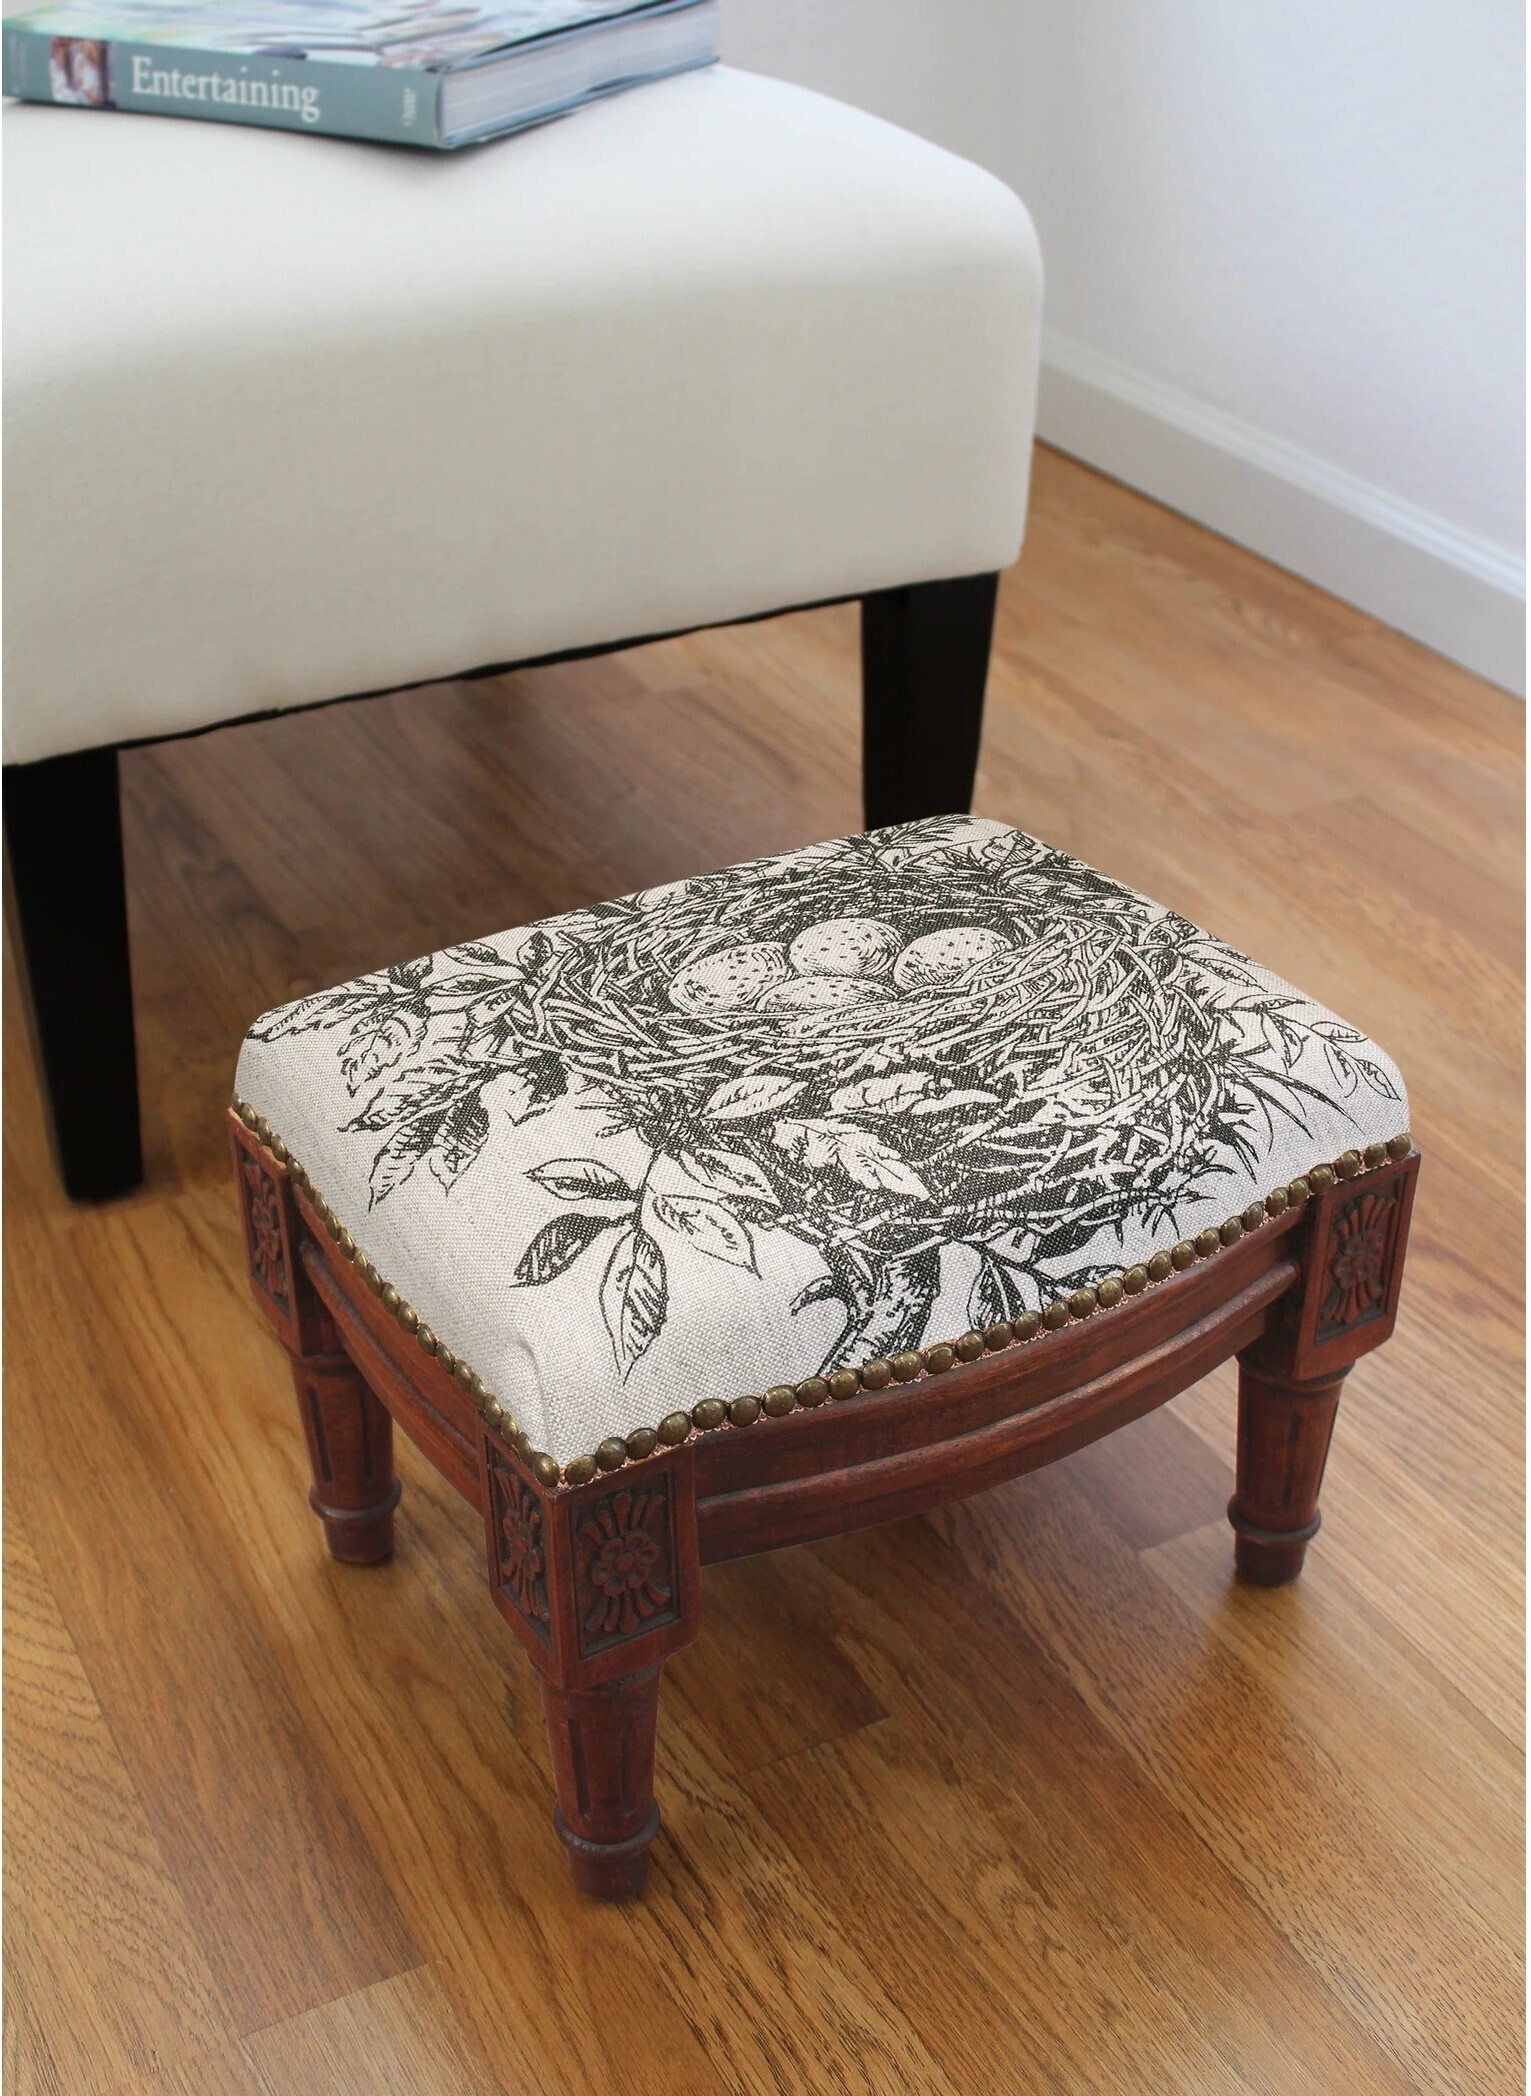 Small footstools with a relevant print